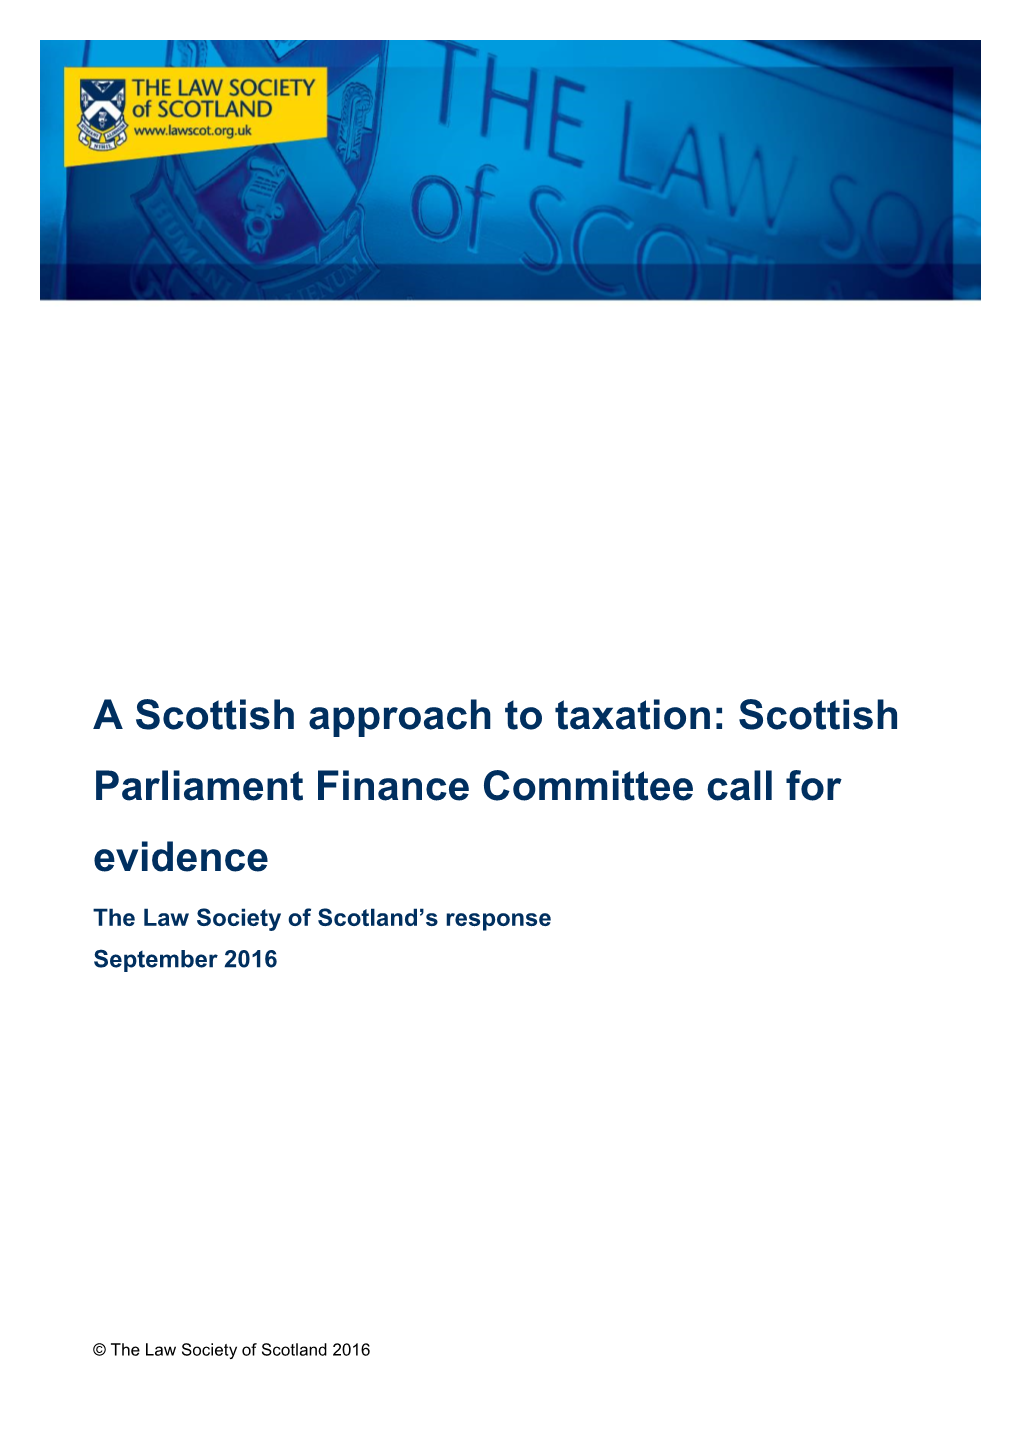 A Scottish Approach to Taxation: Scottish Parliament Finance Committee Call for Evidence